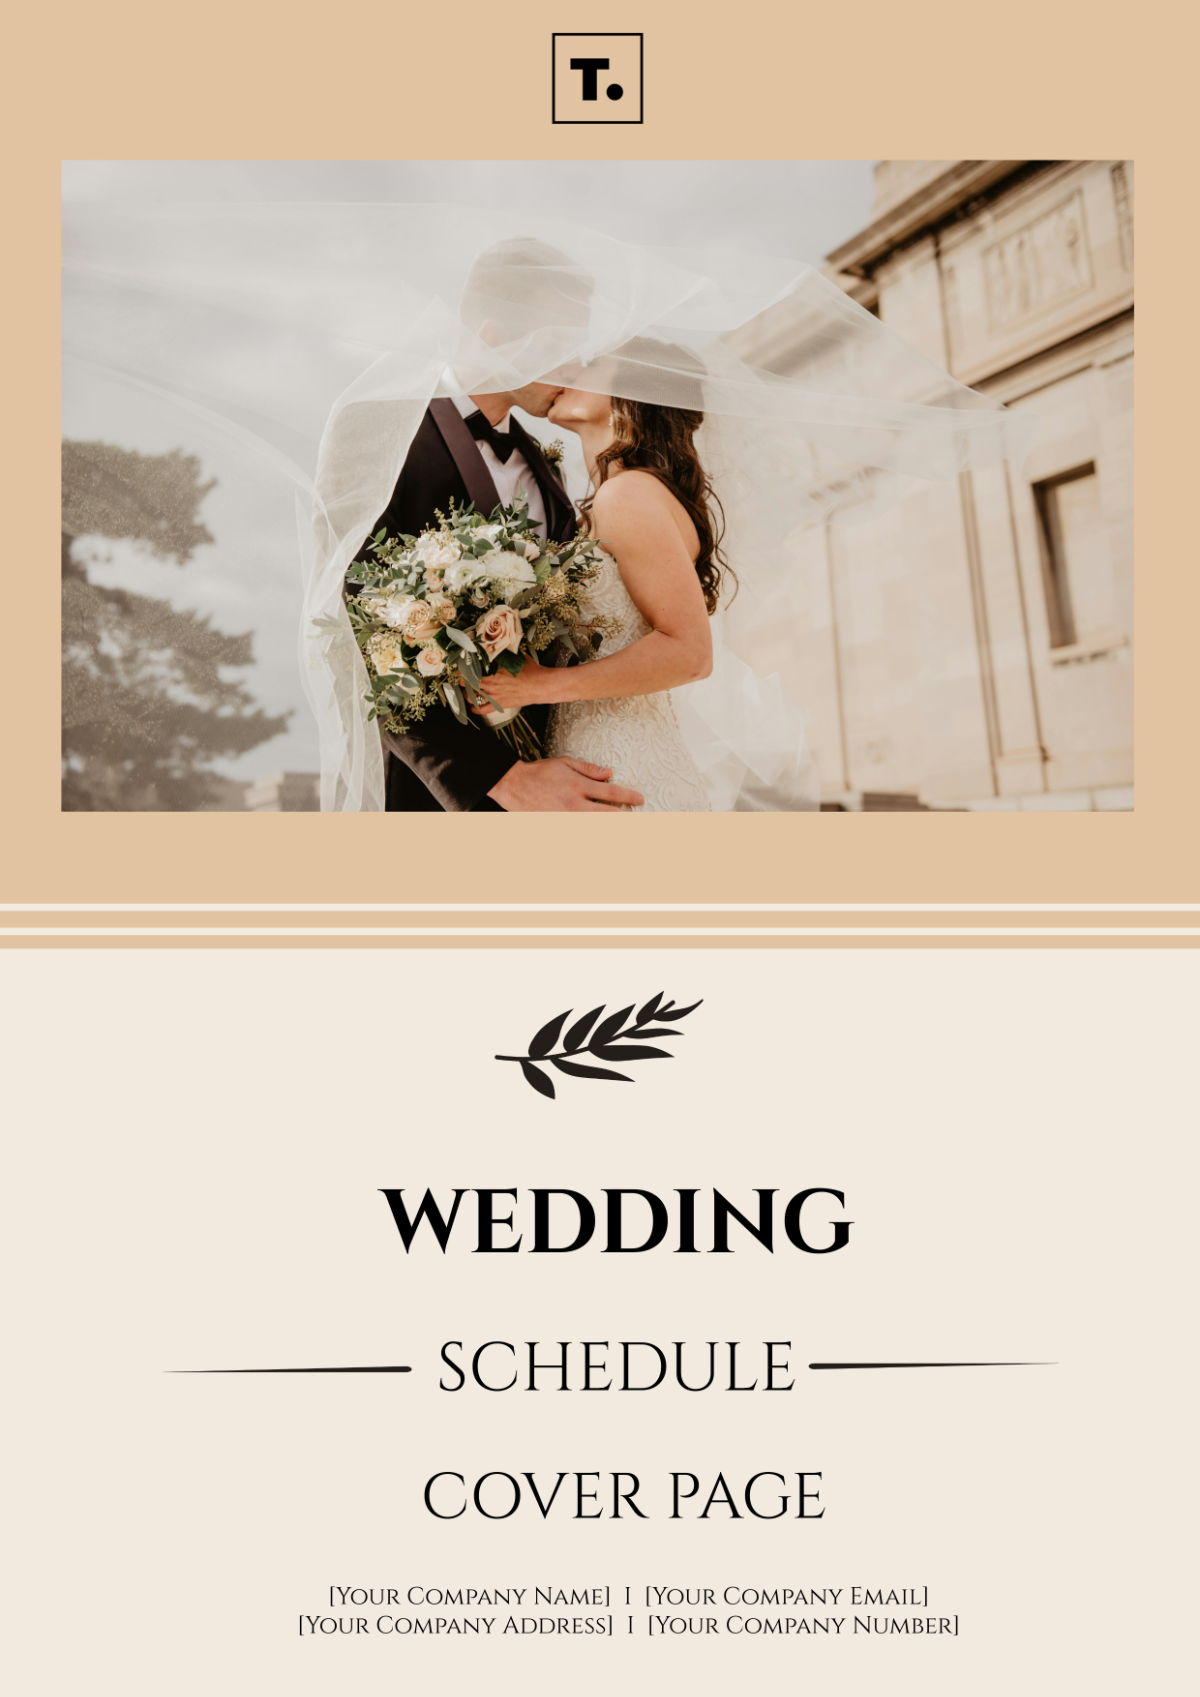 Wedding Schedule Cover Page